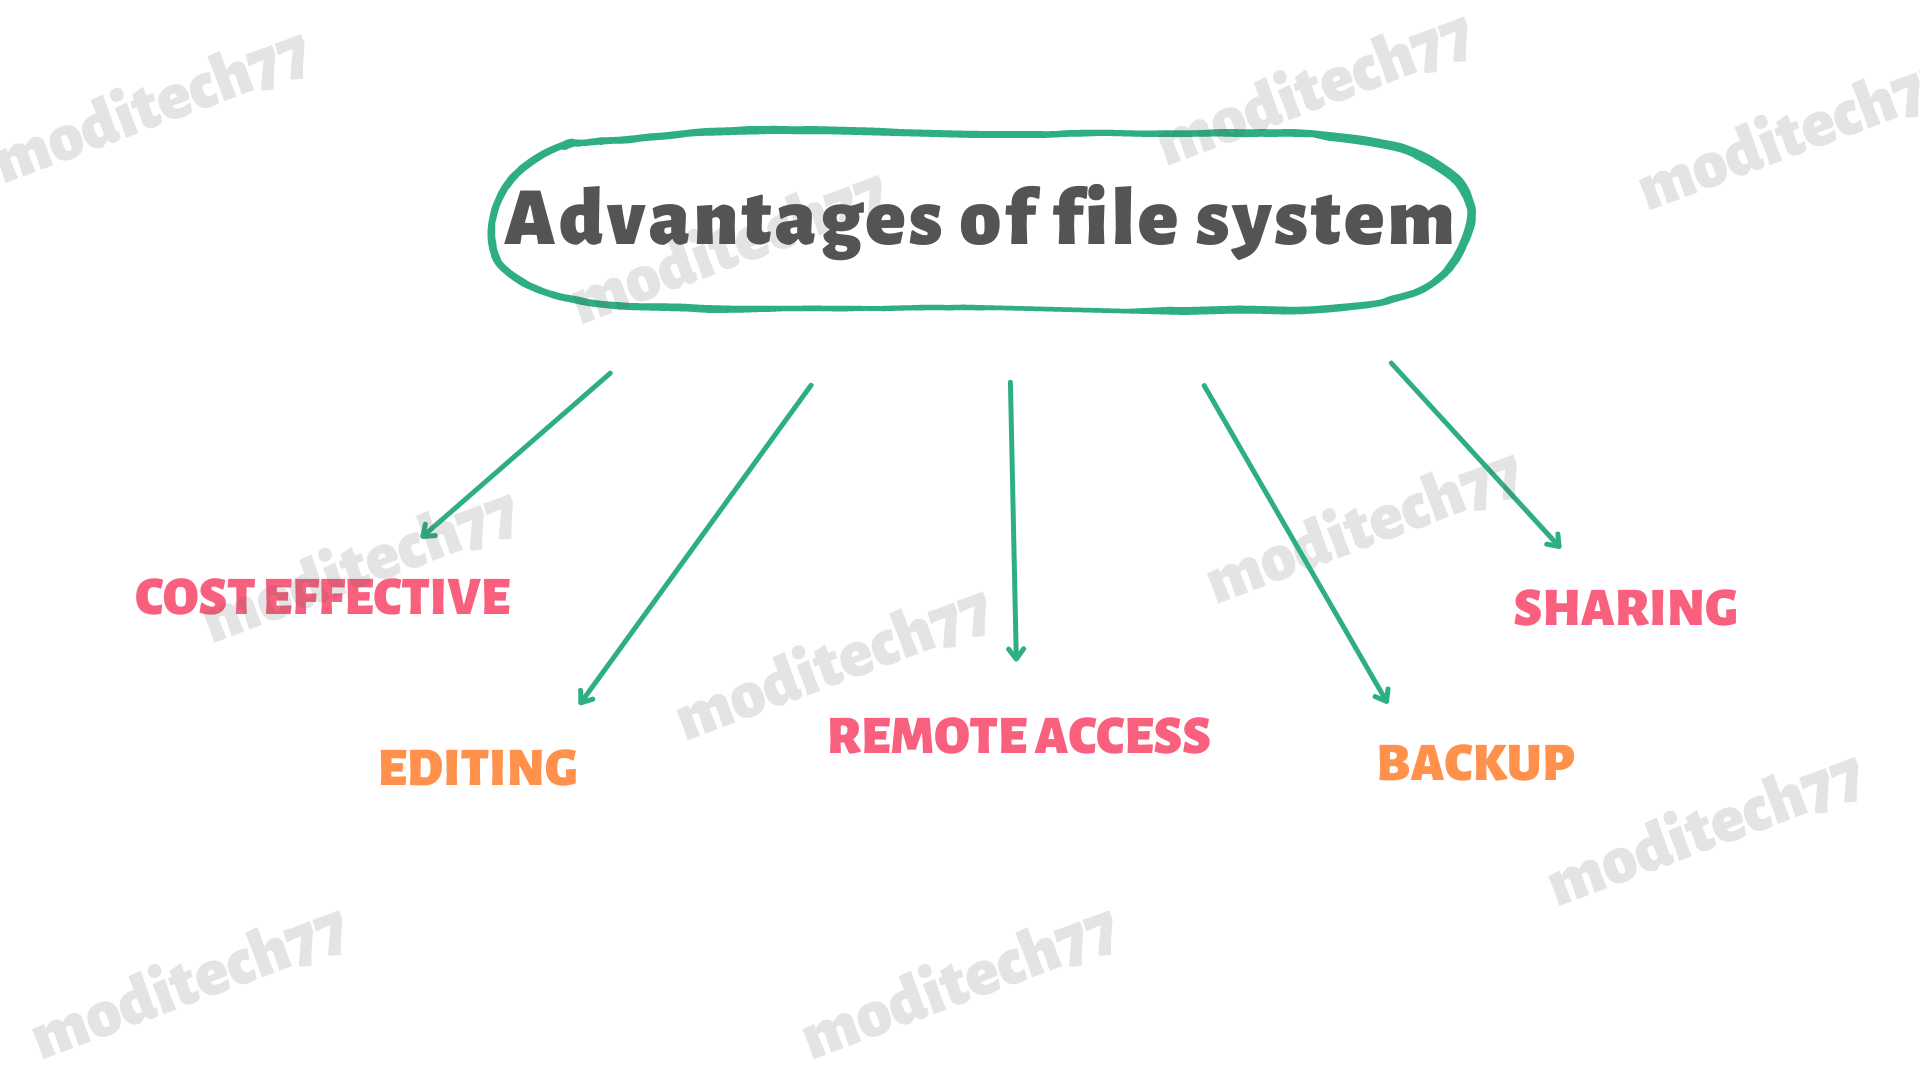 Advantages of file system